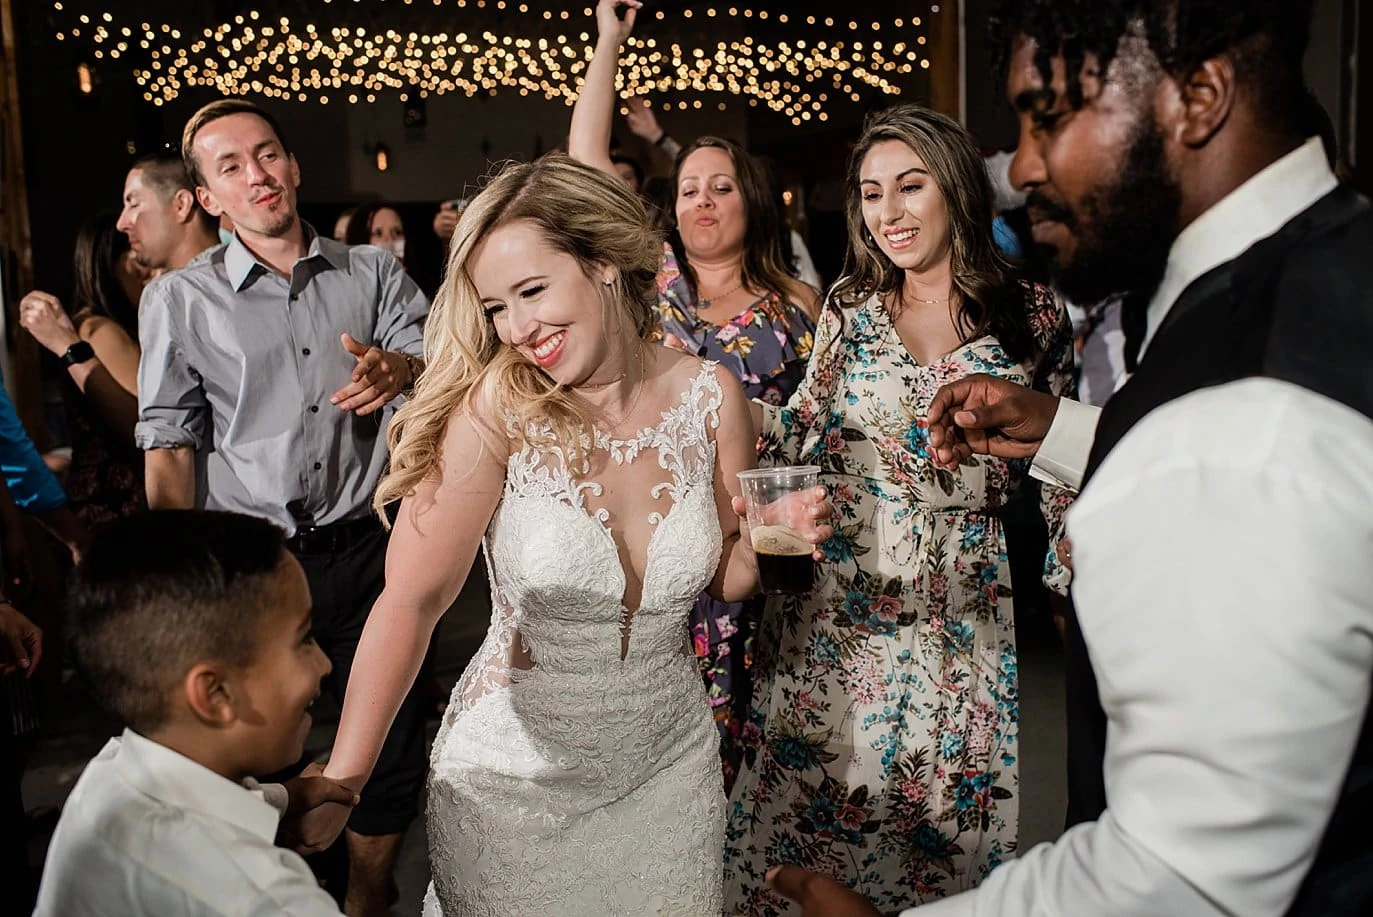 bride dances with guests during wedding reception in barn at at Pagosa Springs wedding by Pagosa Springs Wedding Photographer Jennie Crate